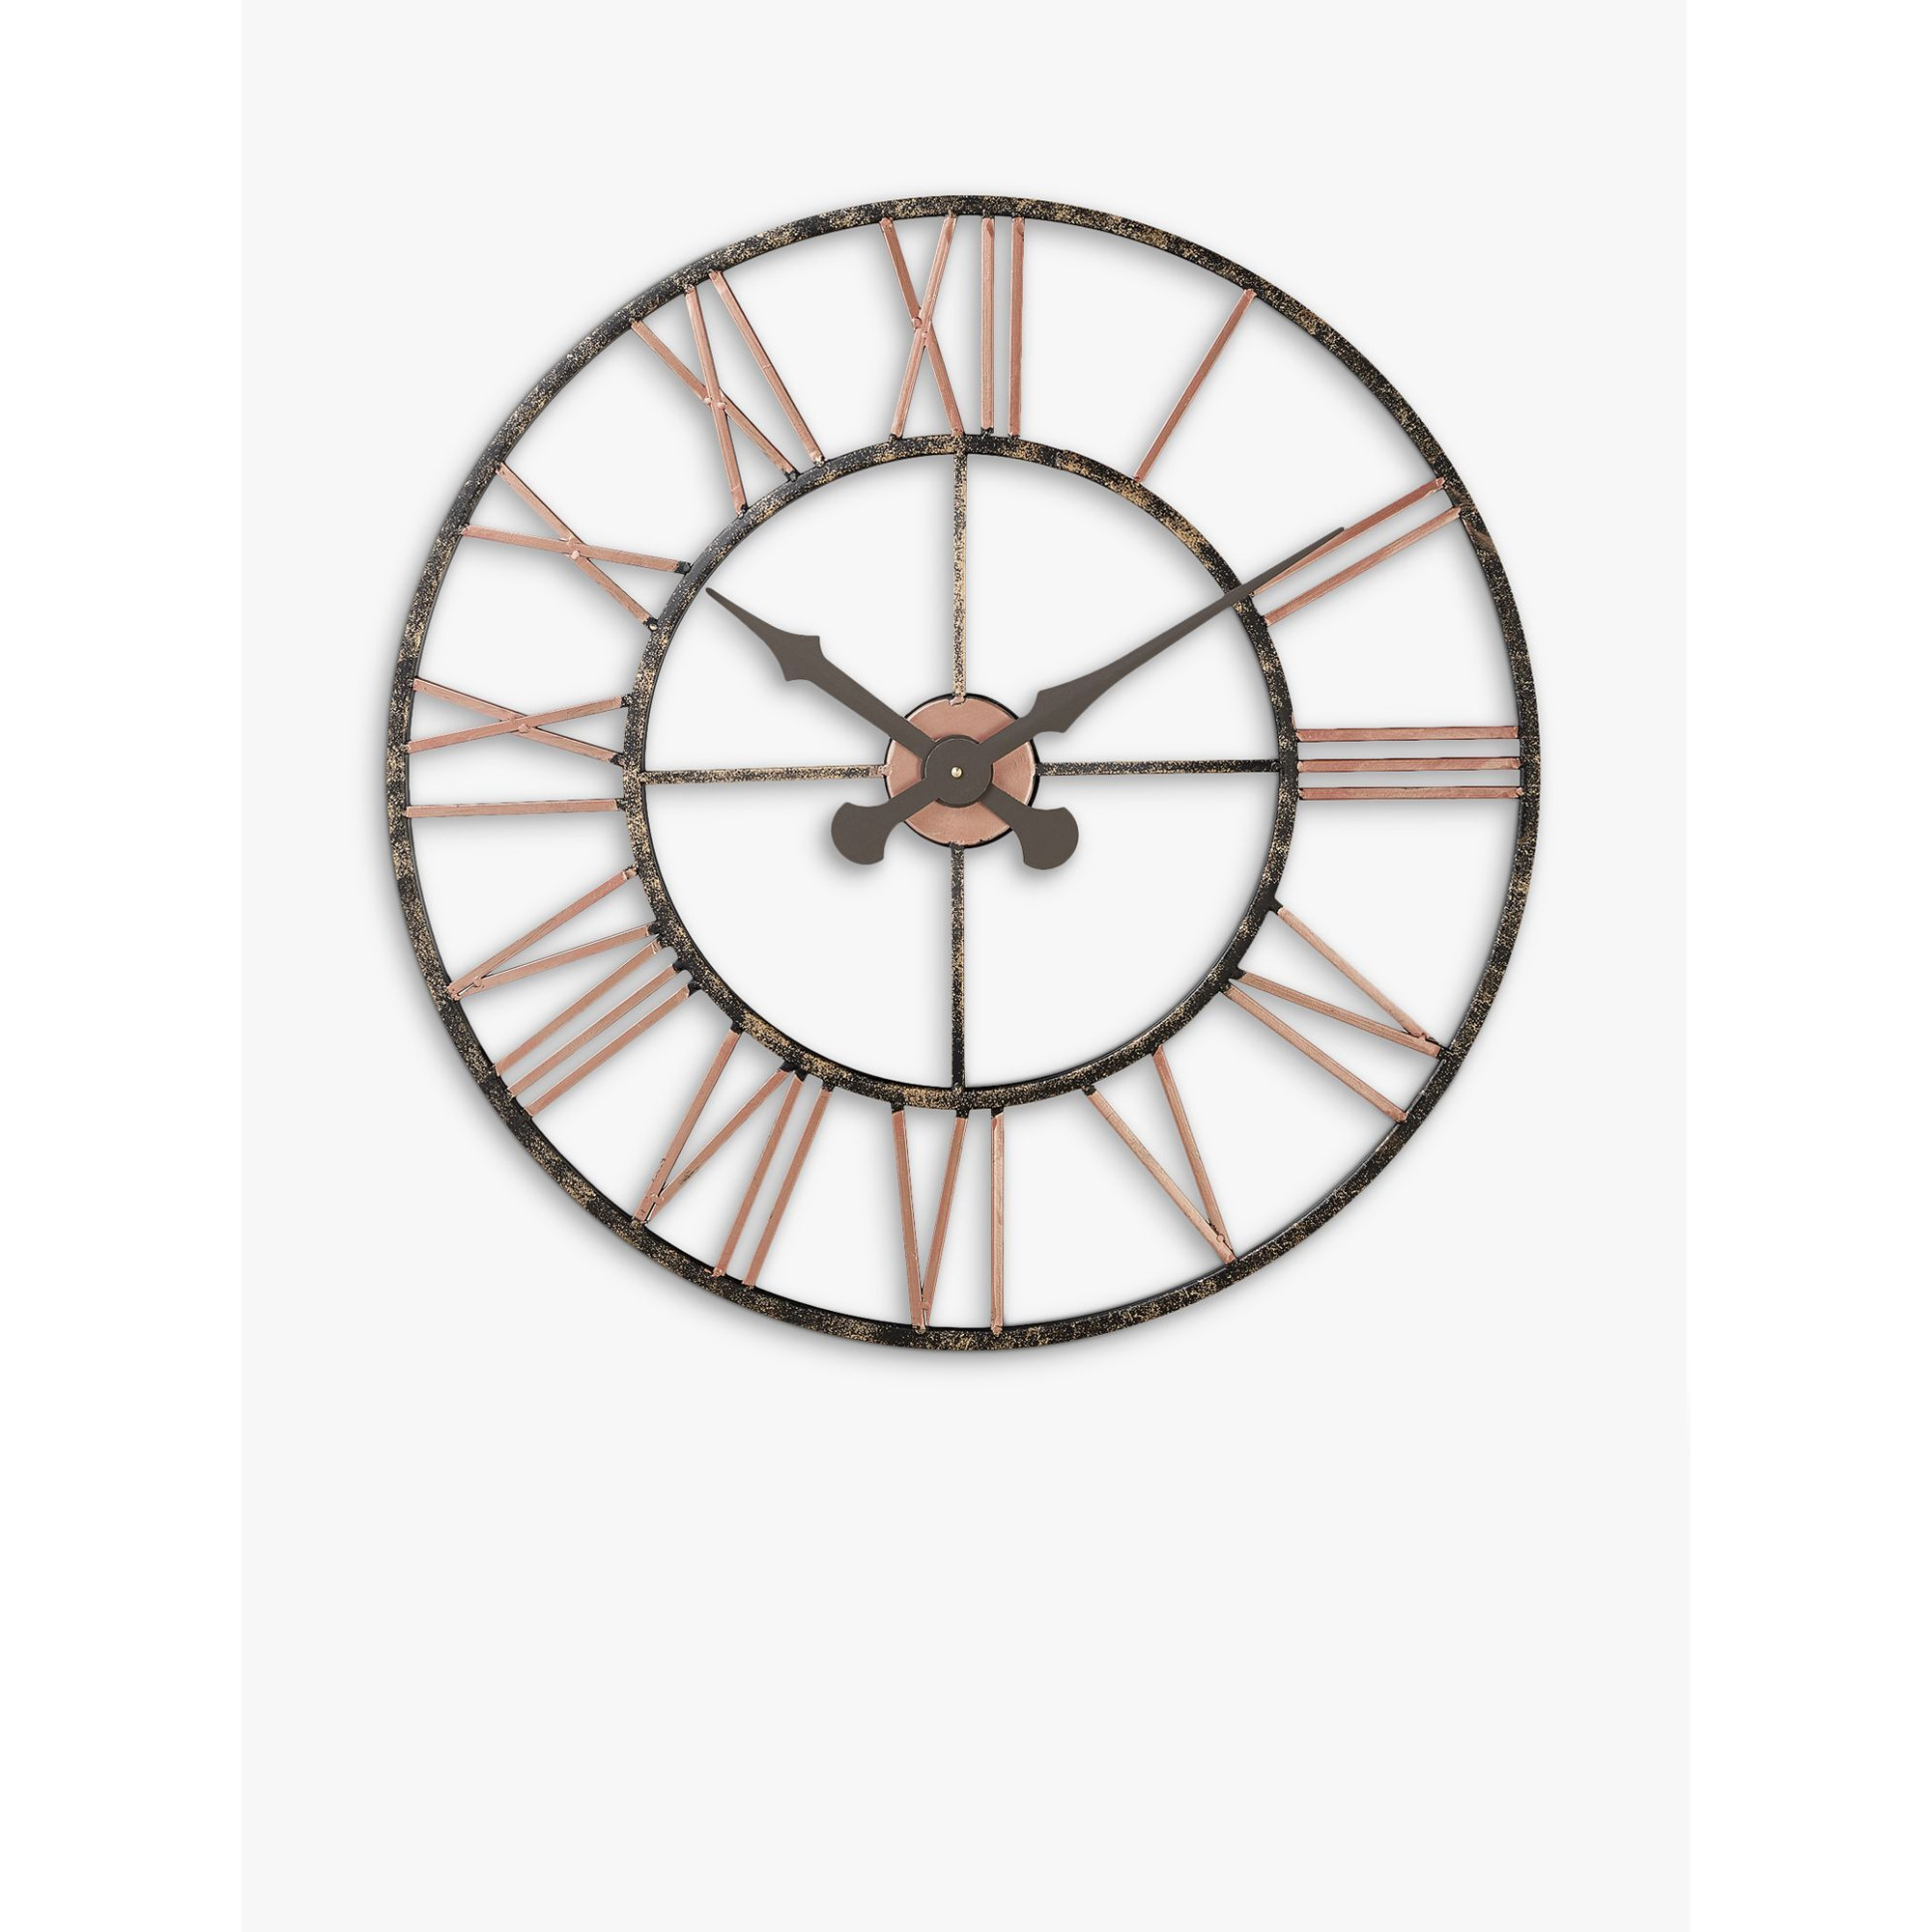 Lascelles Analogue Skeleton Roman Numeral Outdoor Wall Clock, 70cm, Copper - image 1